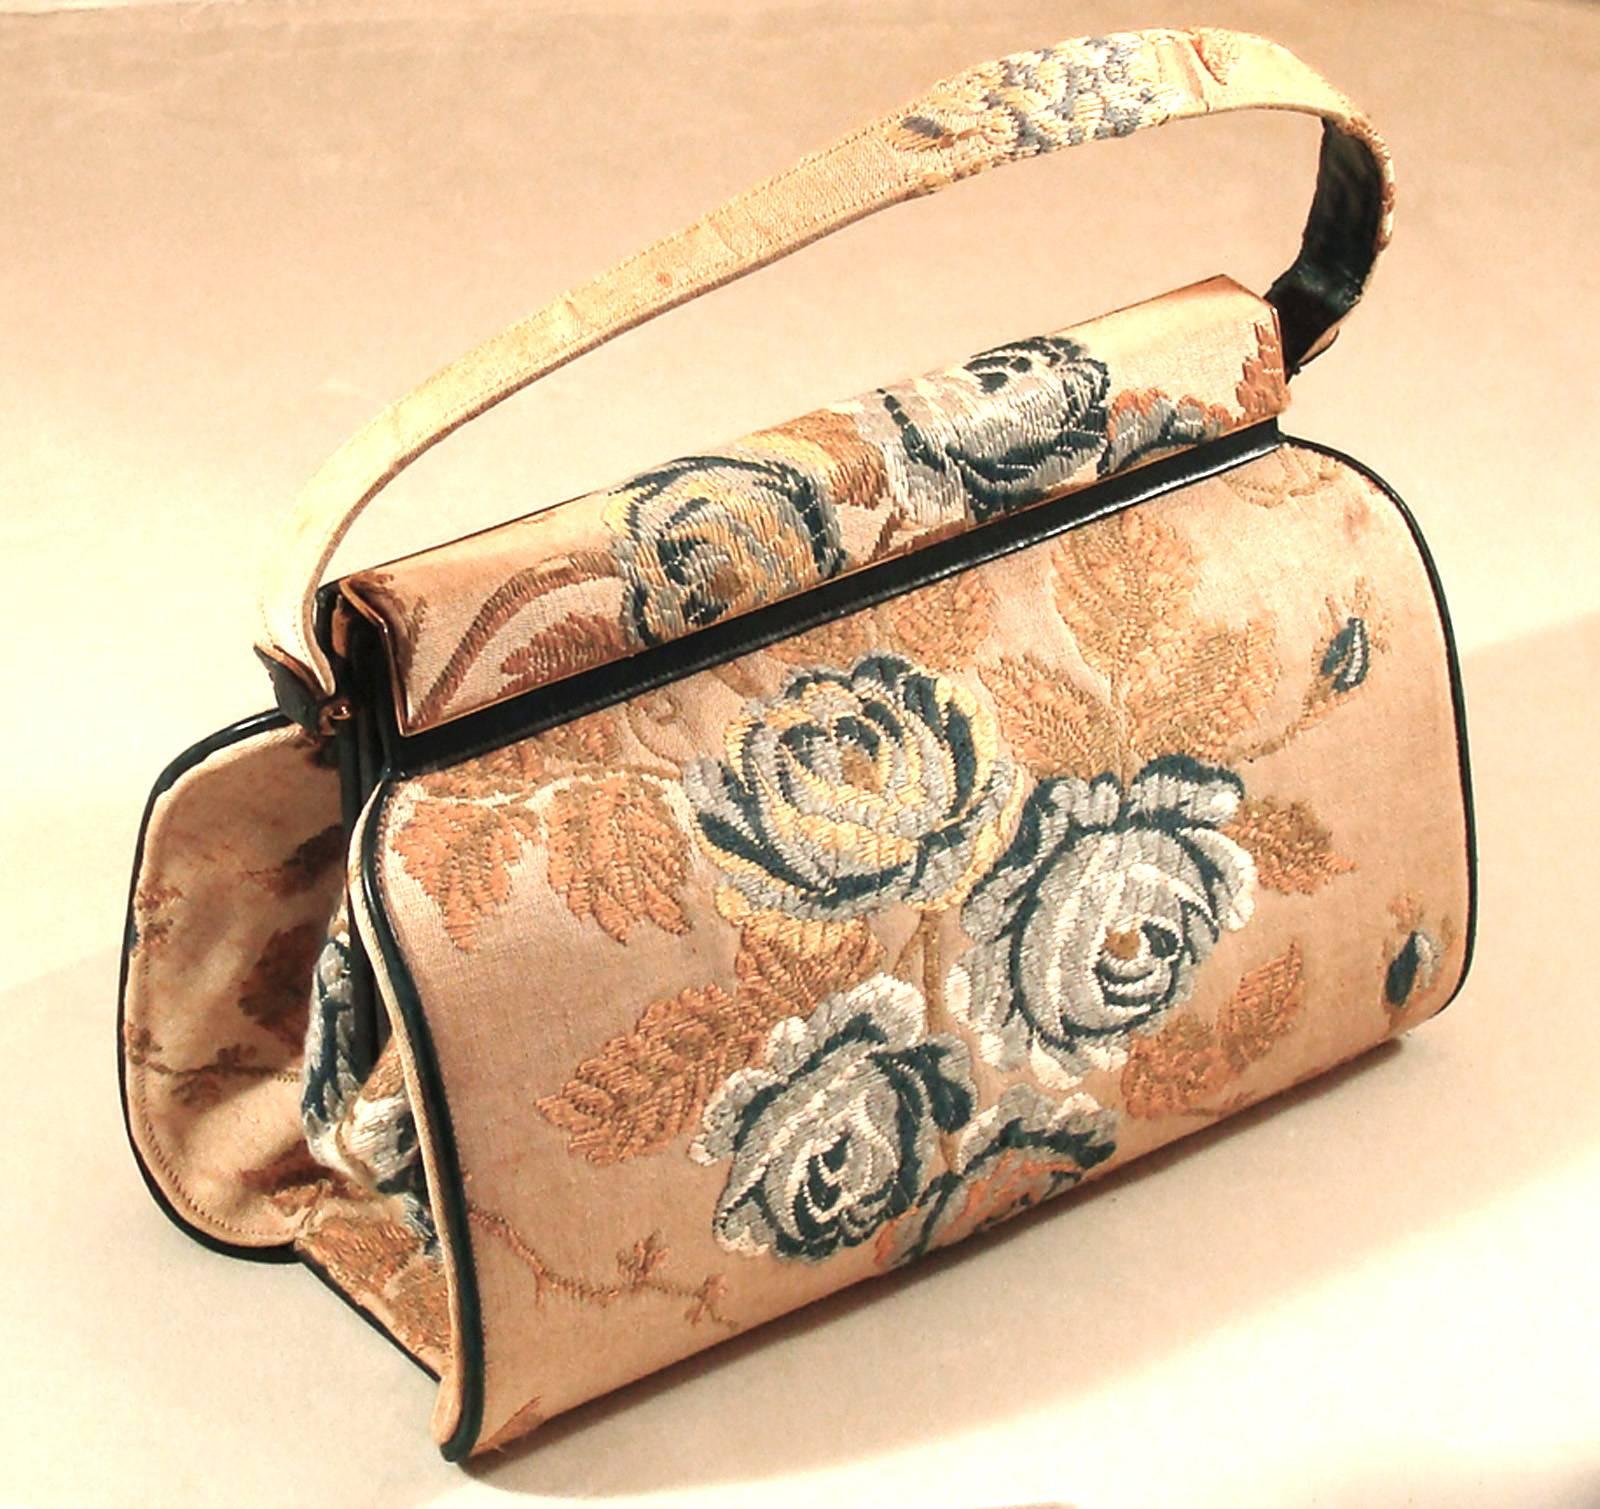 Rare Structured Purse in Floral, Embroidered Fabric by Nettie Rosenstein 1